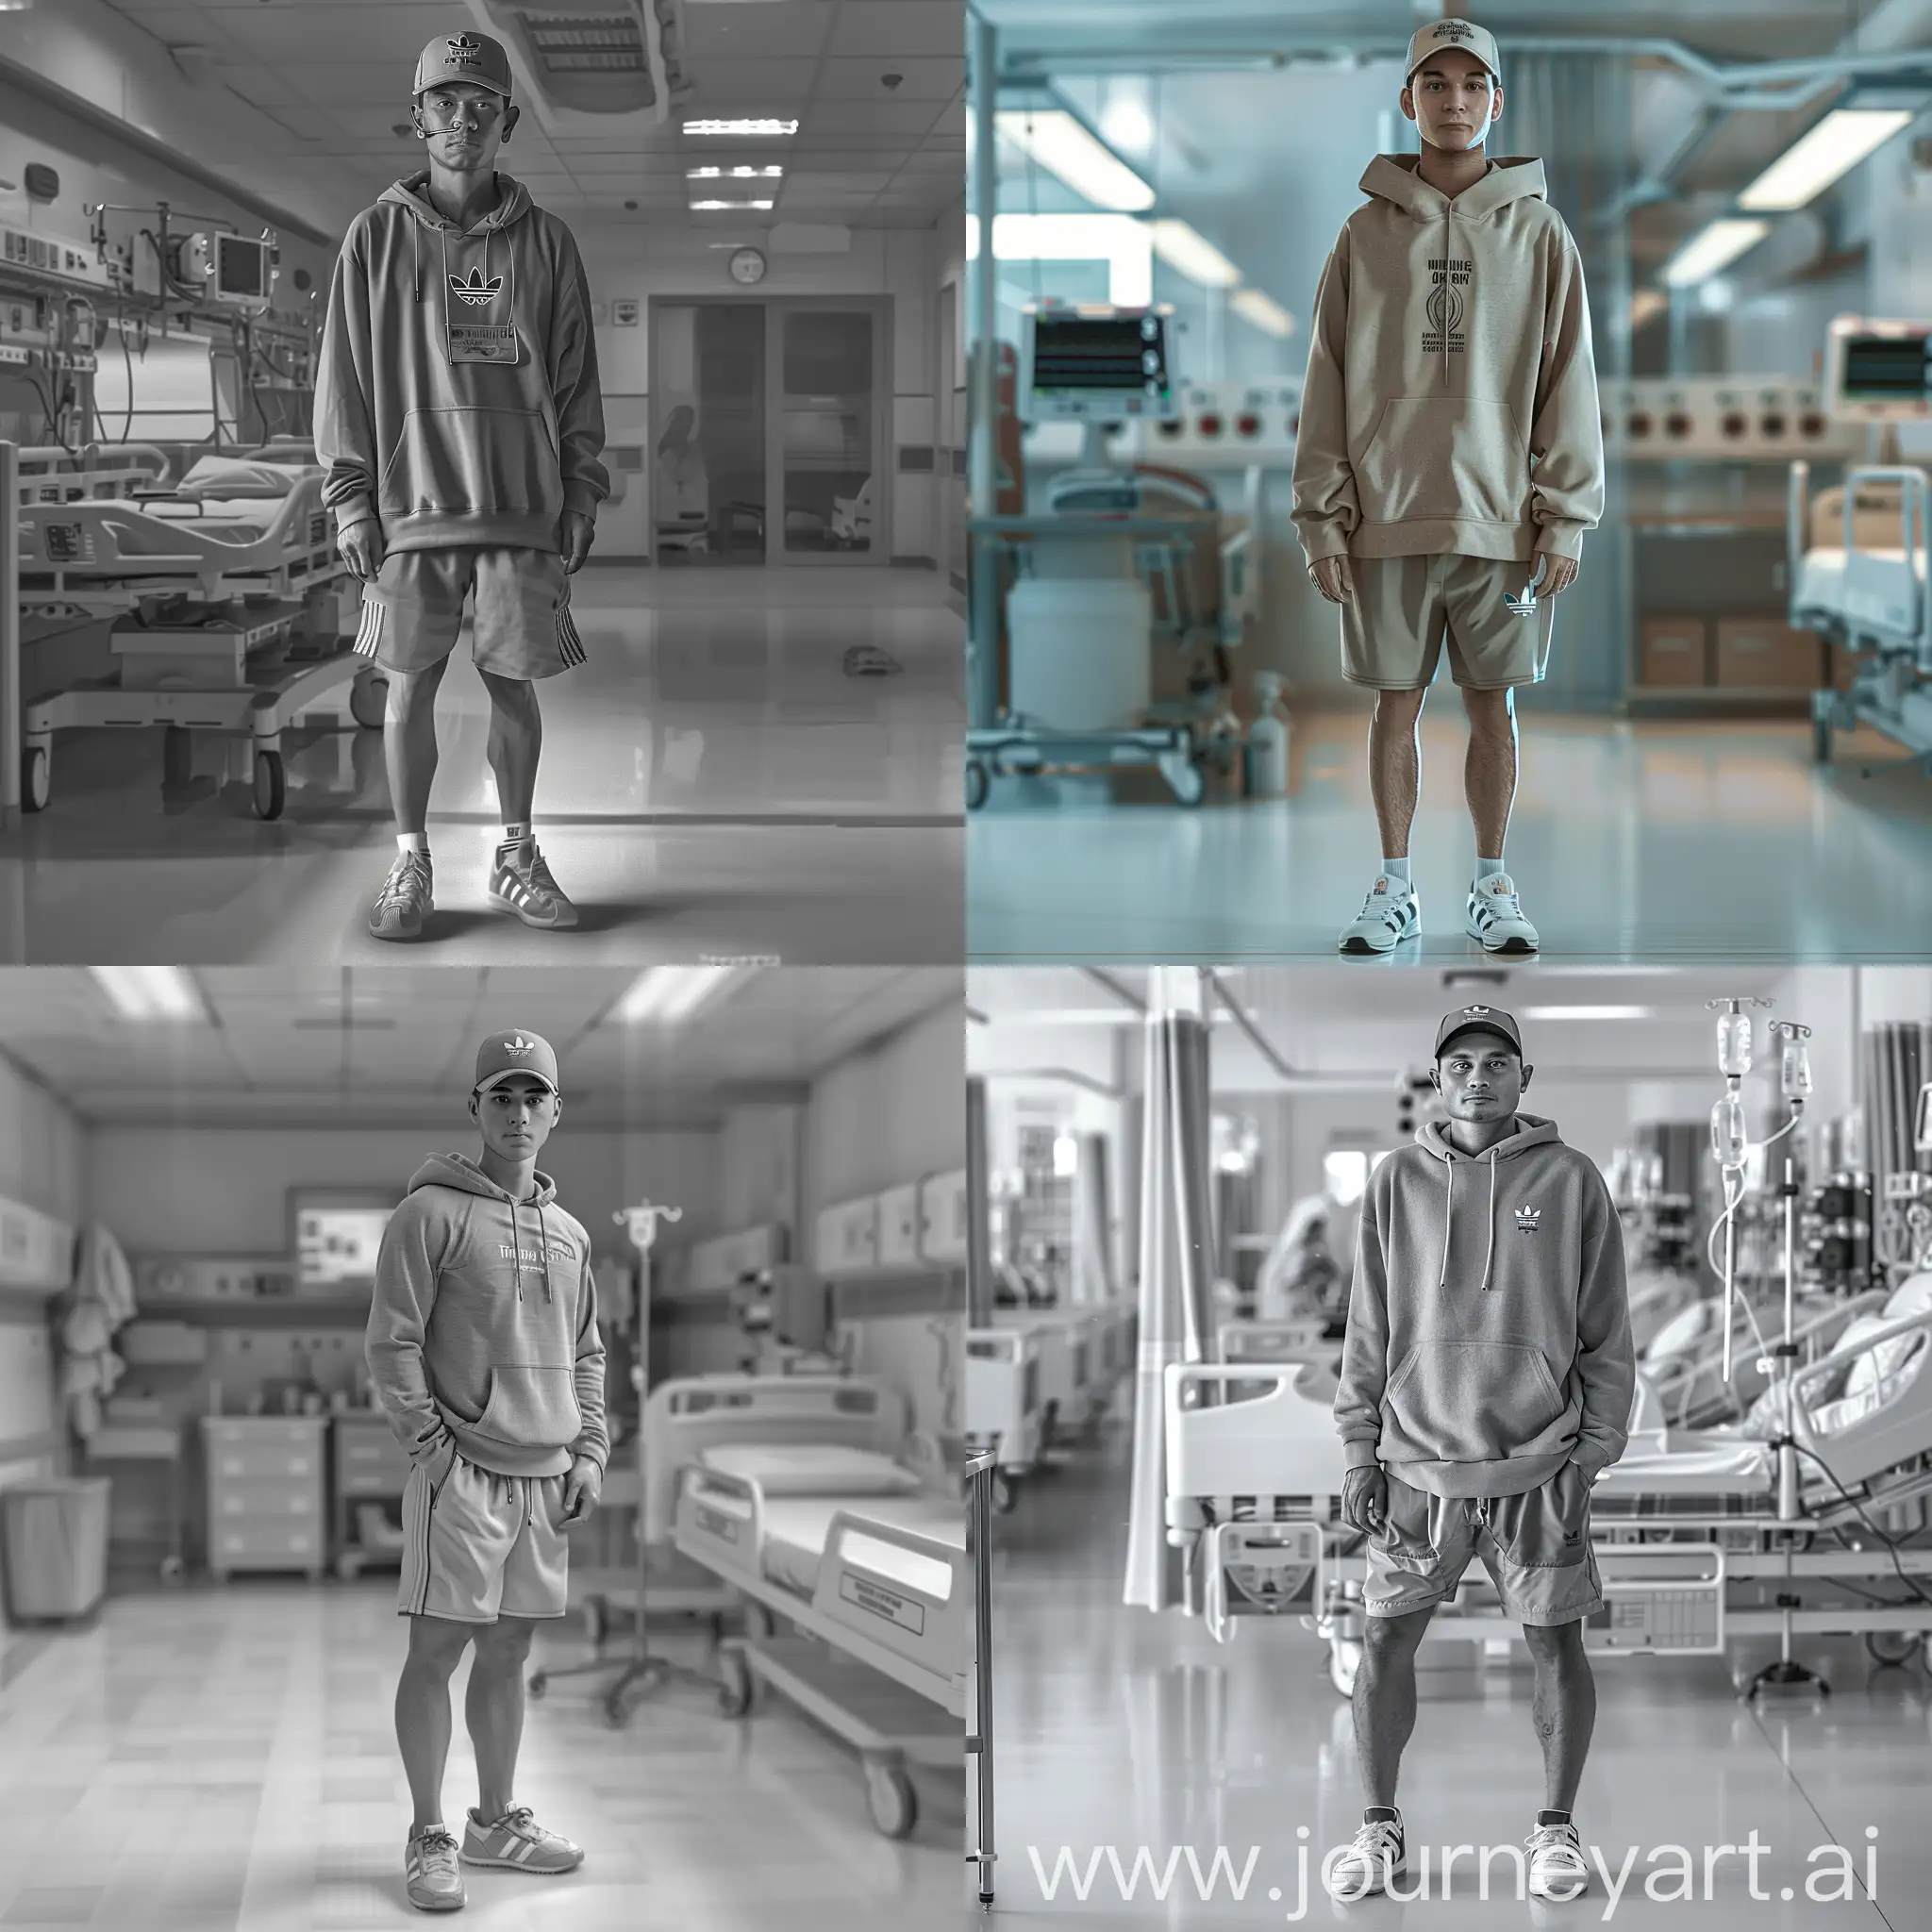 Handsome-Indonesian-Man-in-Hospital-Room-with-Stylish-Attire